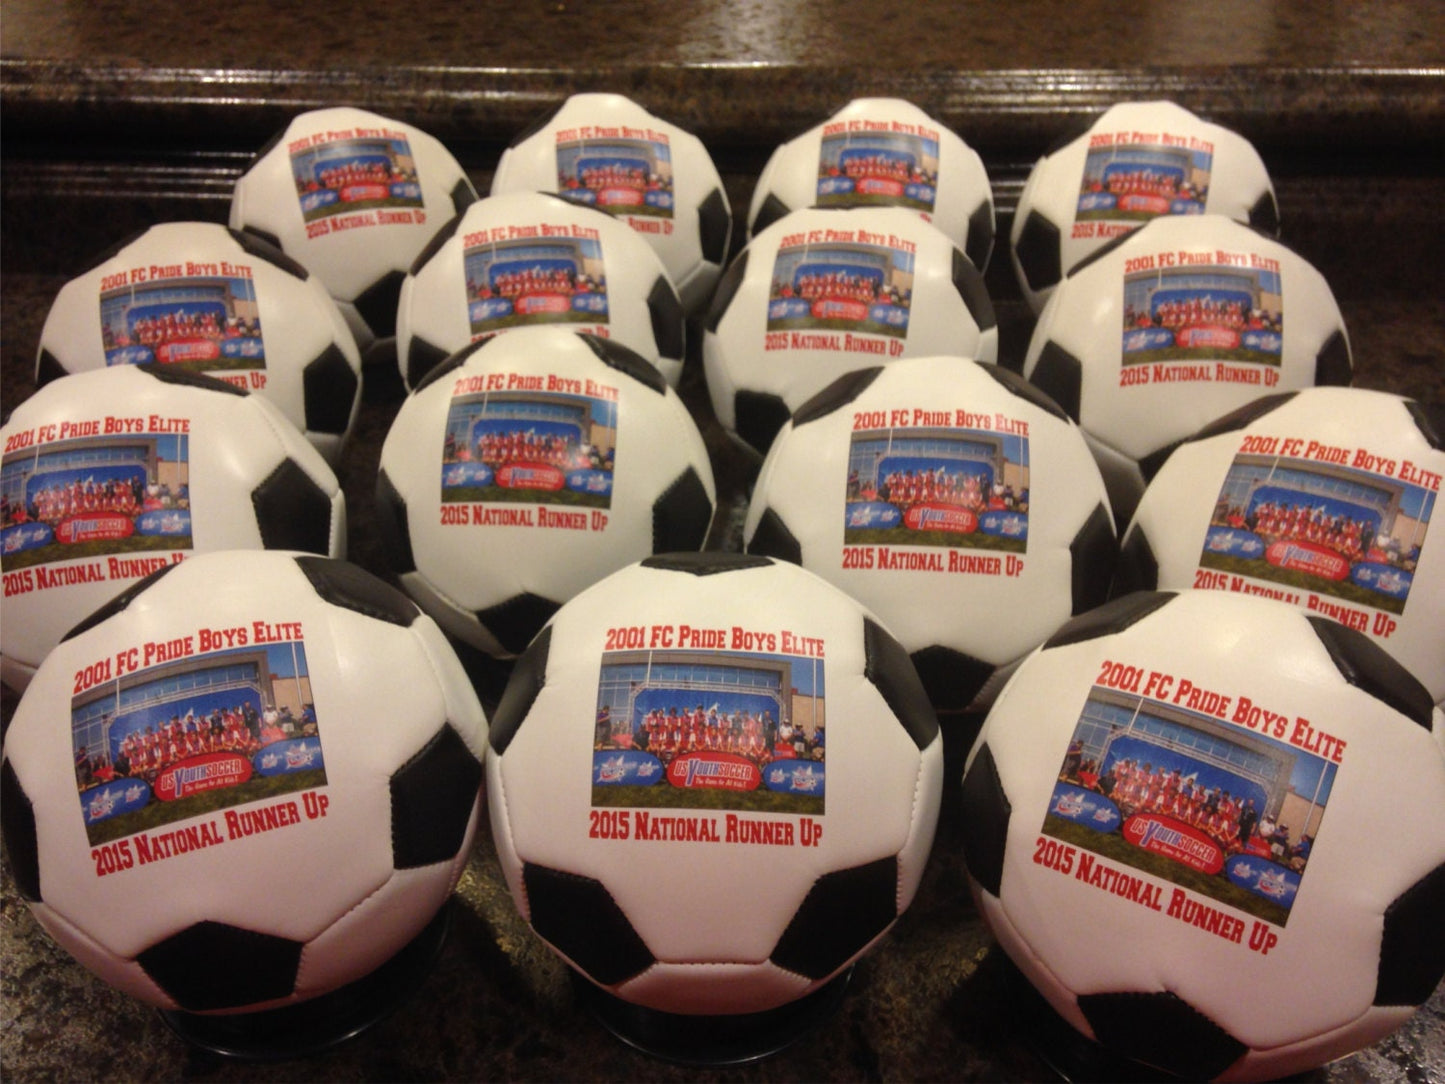 Personalized Custom Mini Soccer Balls for Coaches' Gifts, Senior Gifts, Soccer Player Awards and Sponsors